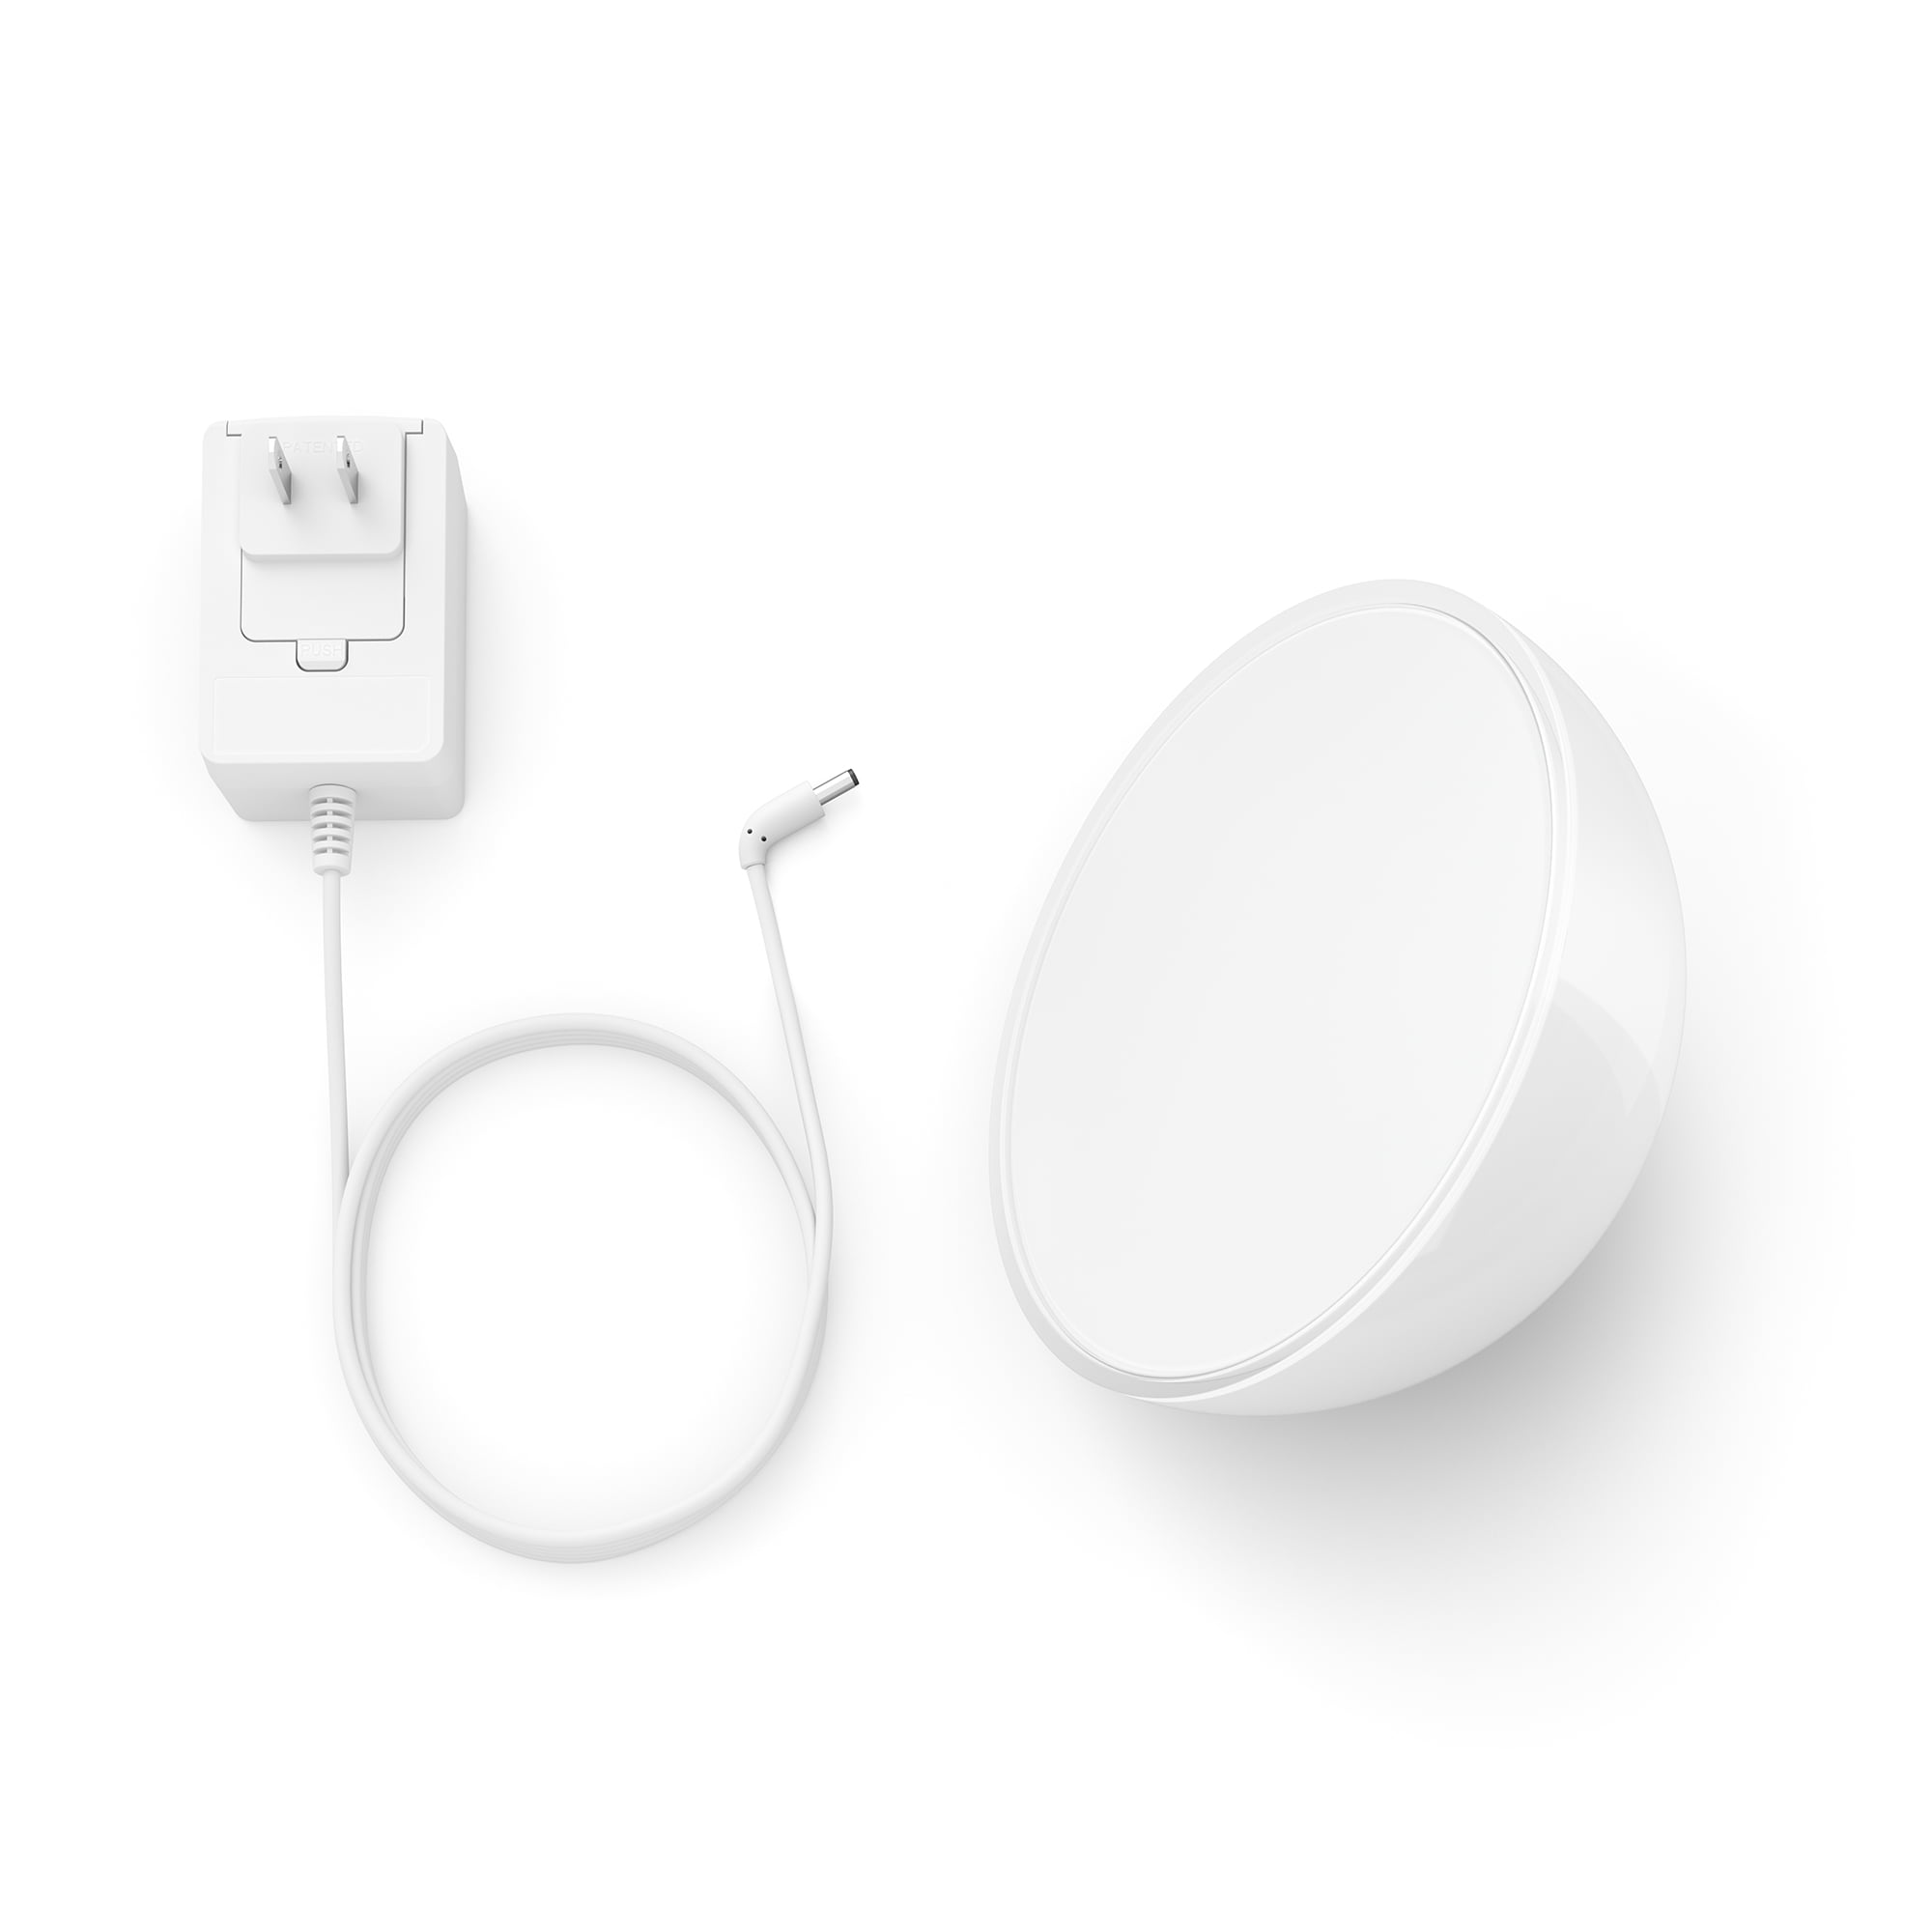 Philips Hue Go Connector LED Smart Portable Light White and Color Ambiance  NA Watt Equivalence